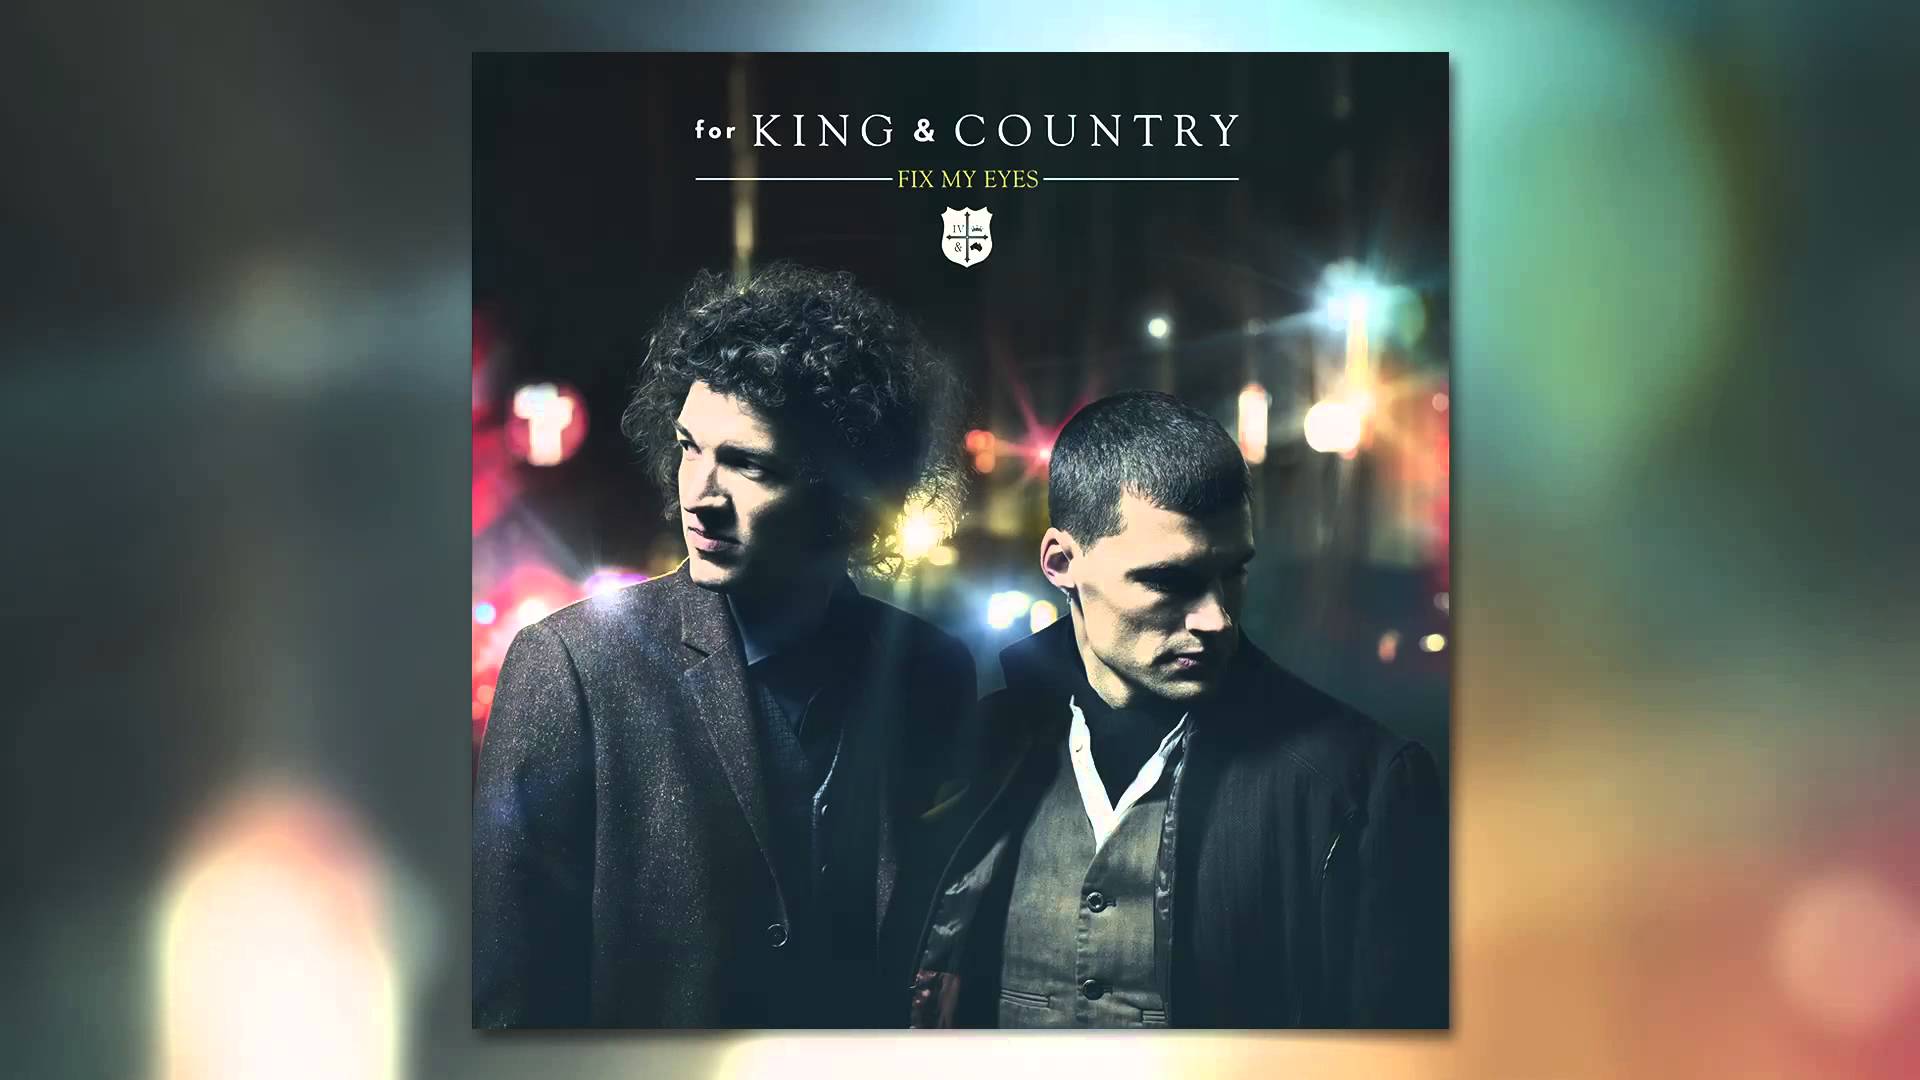 For King & Country - Fix My Eyes